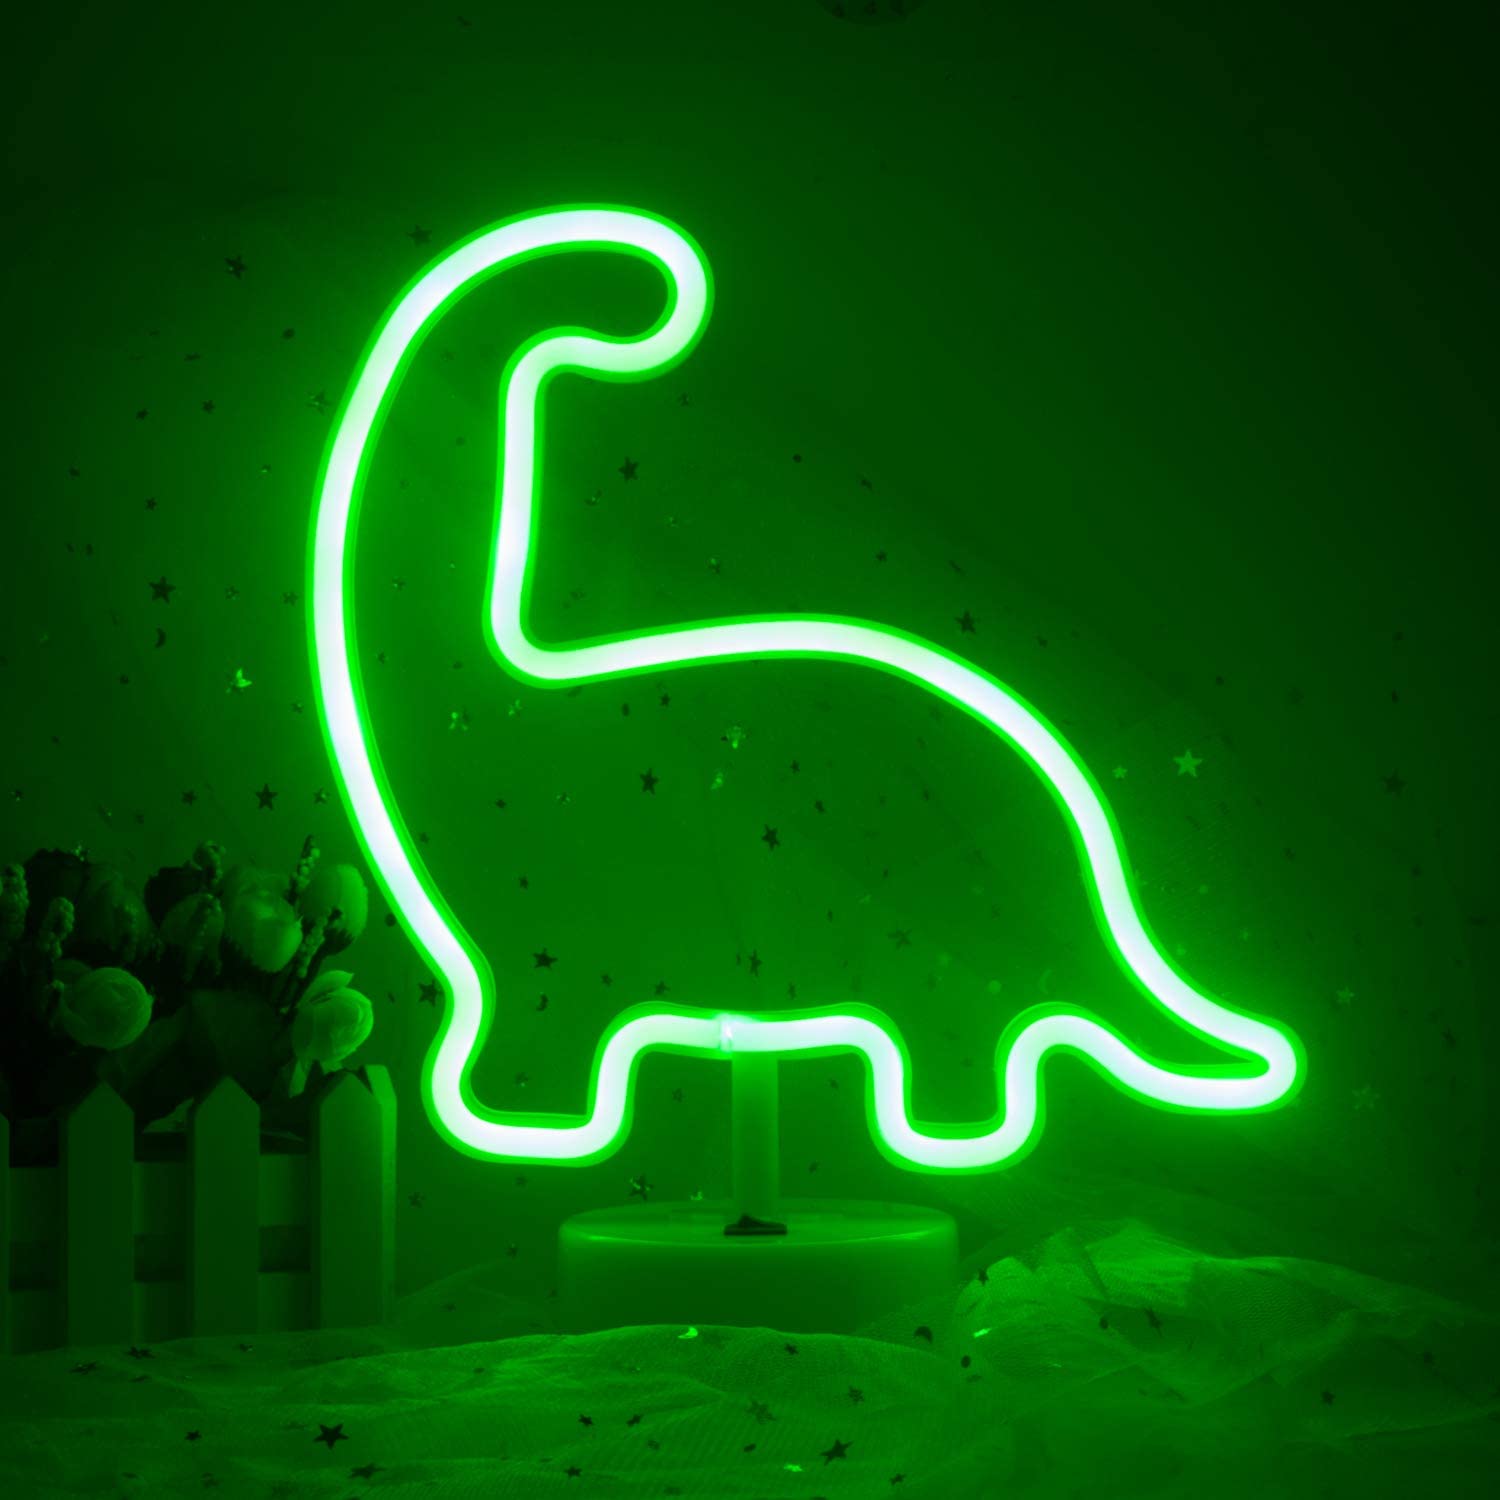 Decorative LED Dinosaur Shaped Neon Signs Neon Night Light with Holder Table Decoration for Wedding Sign, Birthday Party, Kids Room, Living Room, Bedroom, or Bar(Green Dinosaur)